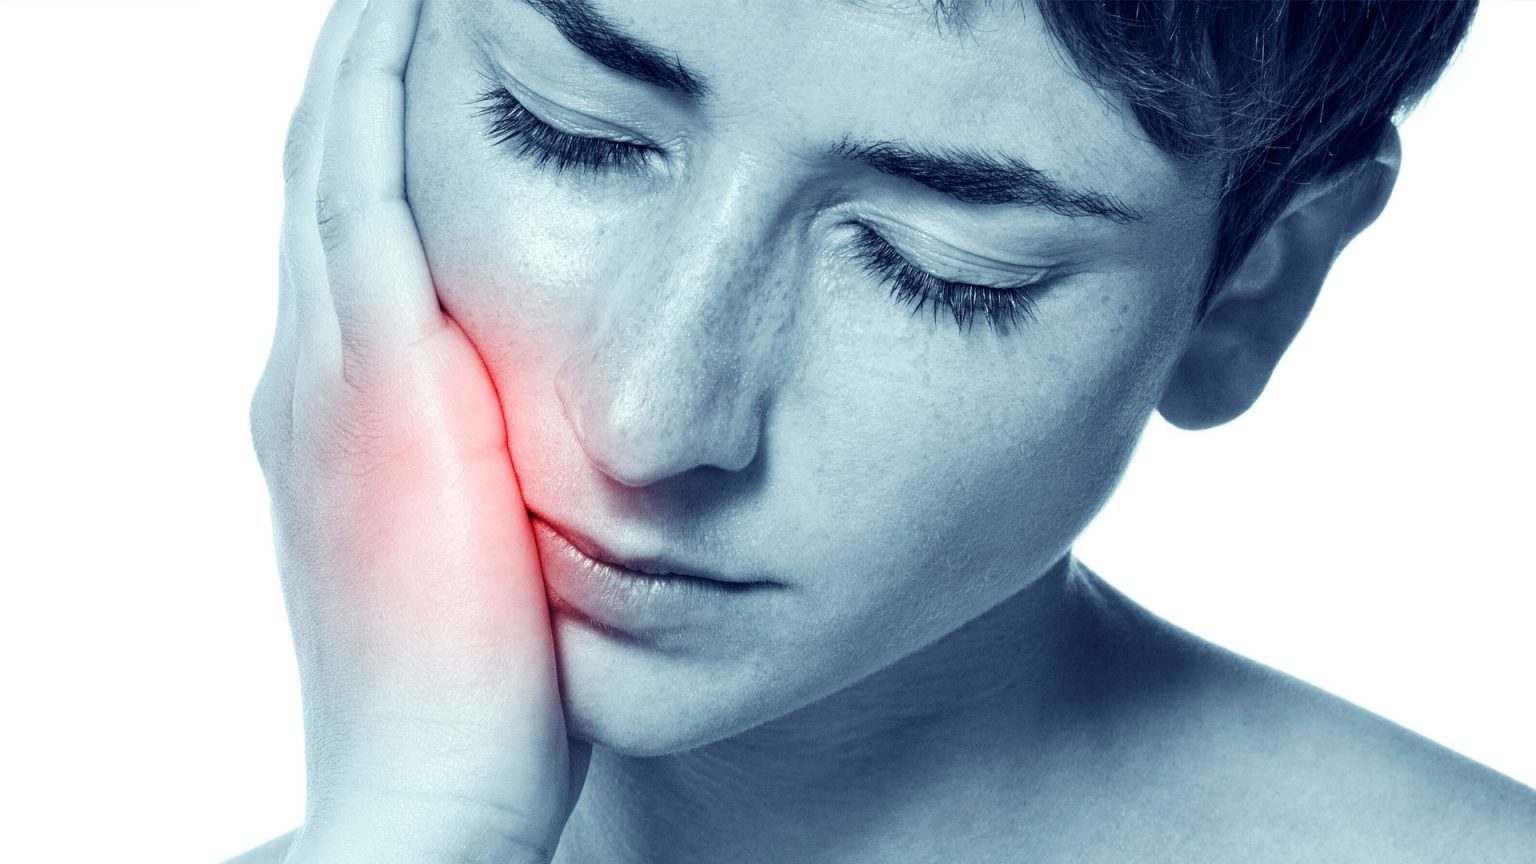 WHAT IS THE TMJ SYNDROME